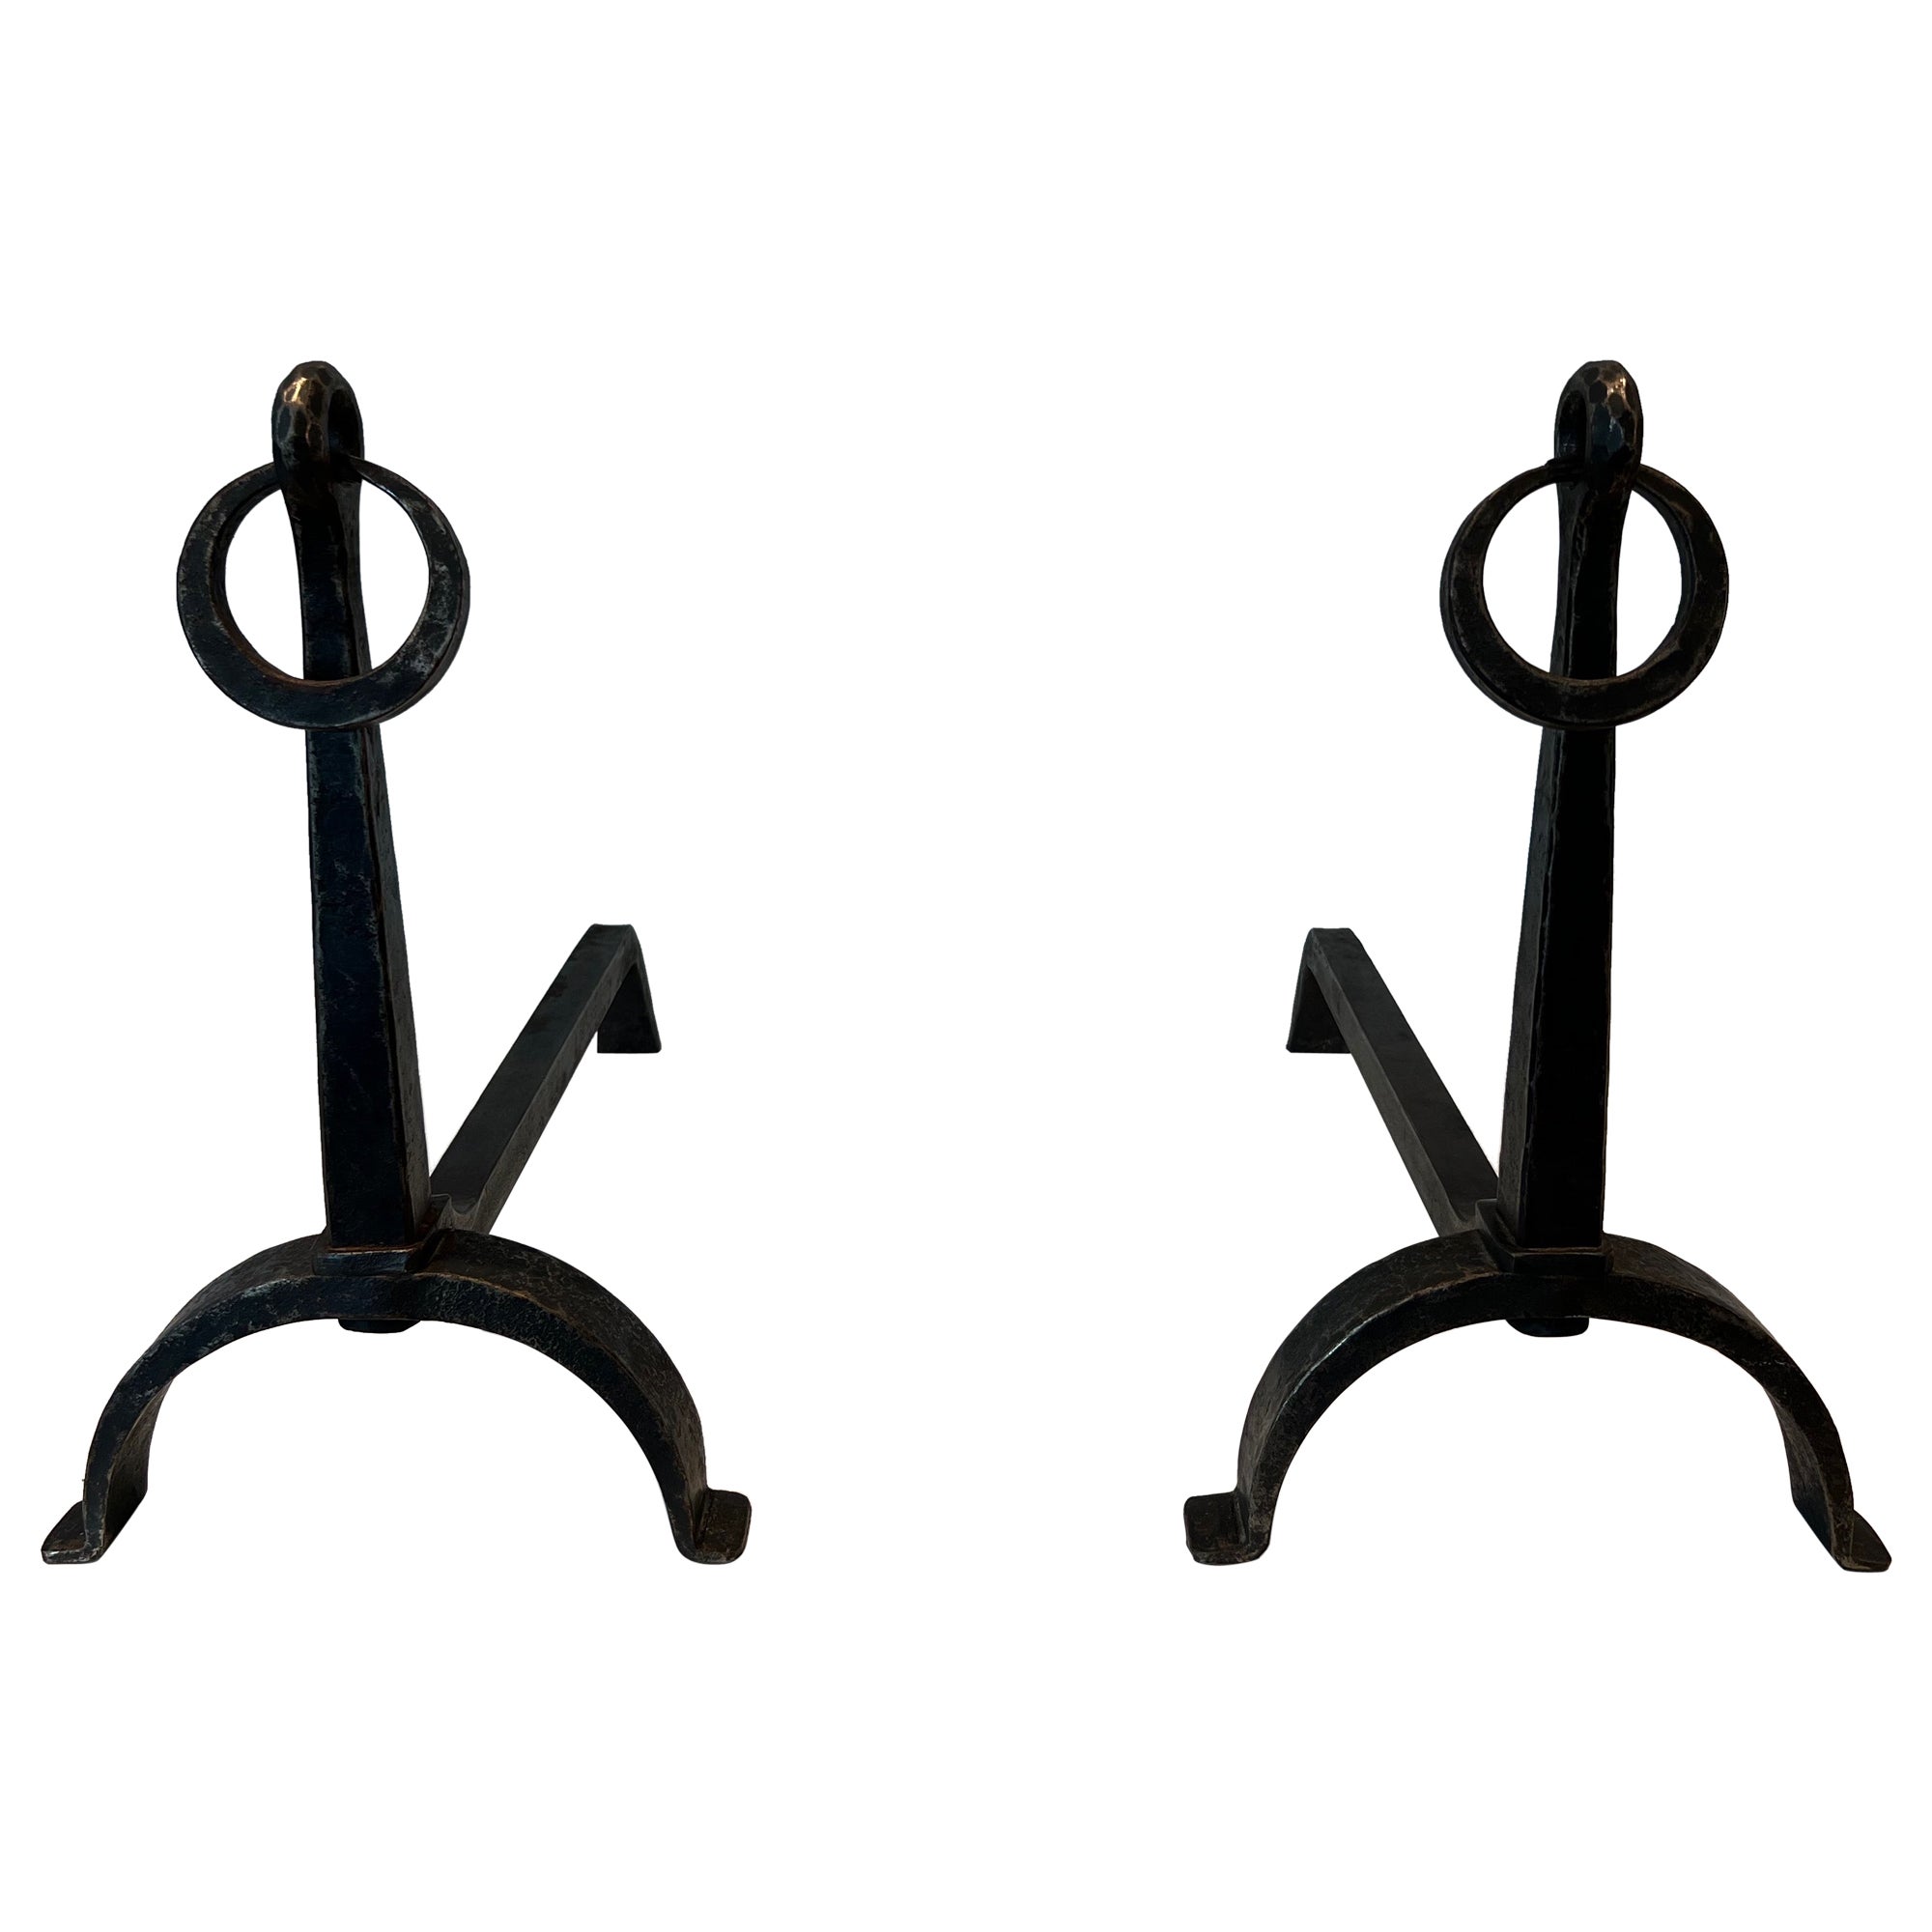 Pair of Wrought Iron Andirons in the style of Jacques Adnet